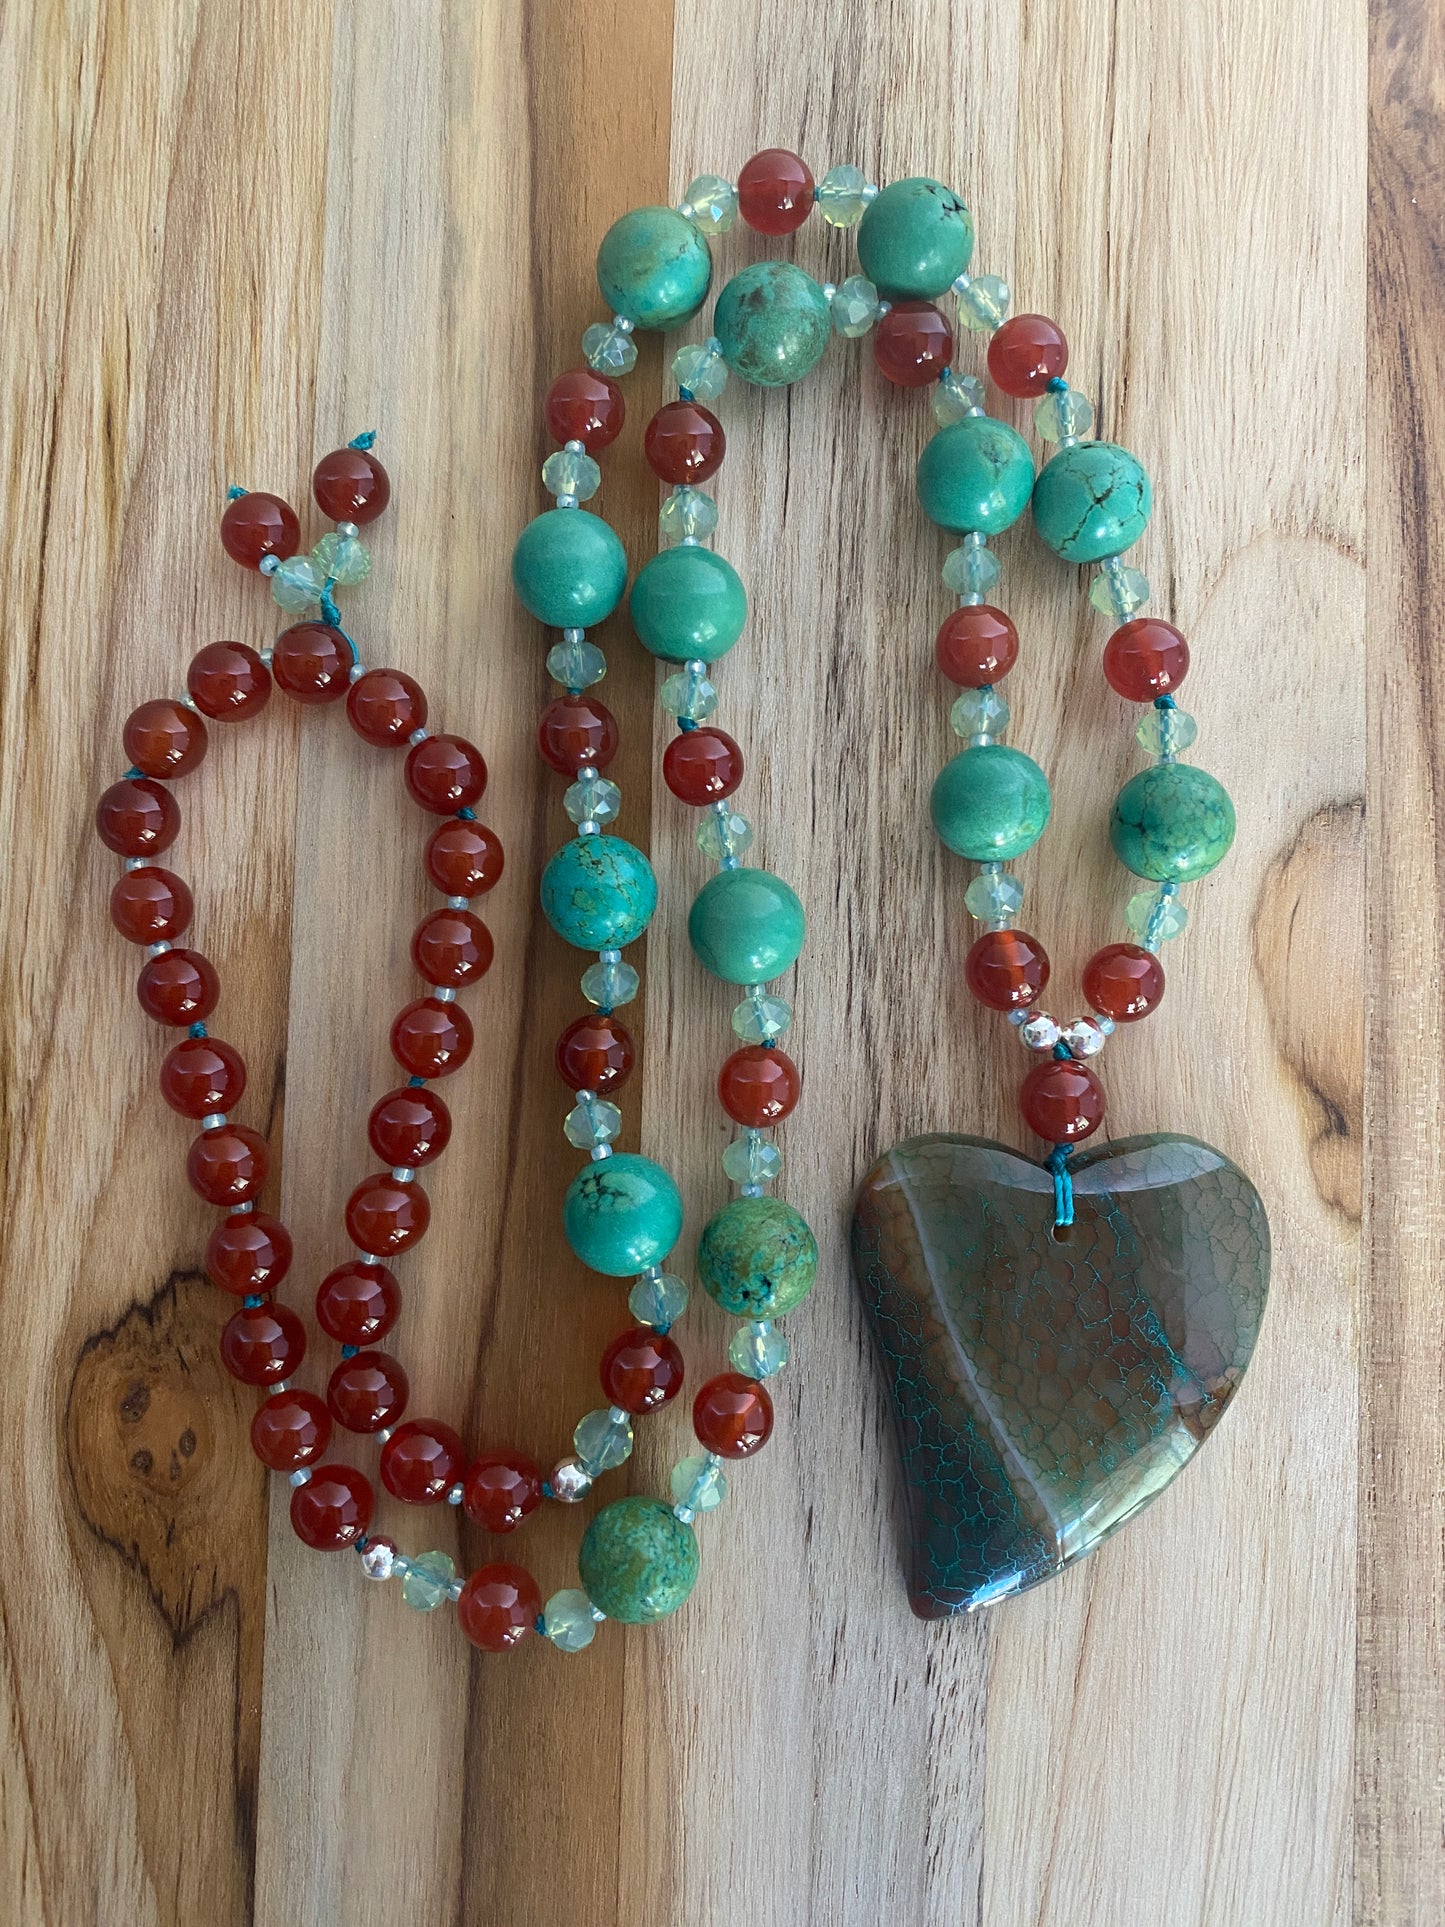 28" Long Brown-Green Dragon Vein Agate Heart Pendant Necklace with Turquoise & Carnelian Beads